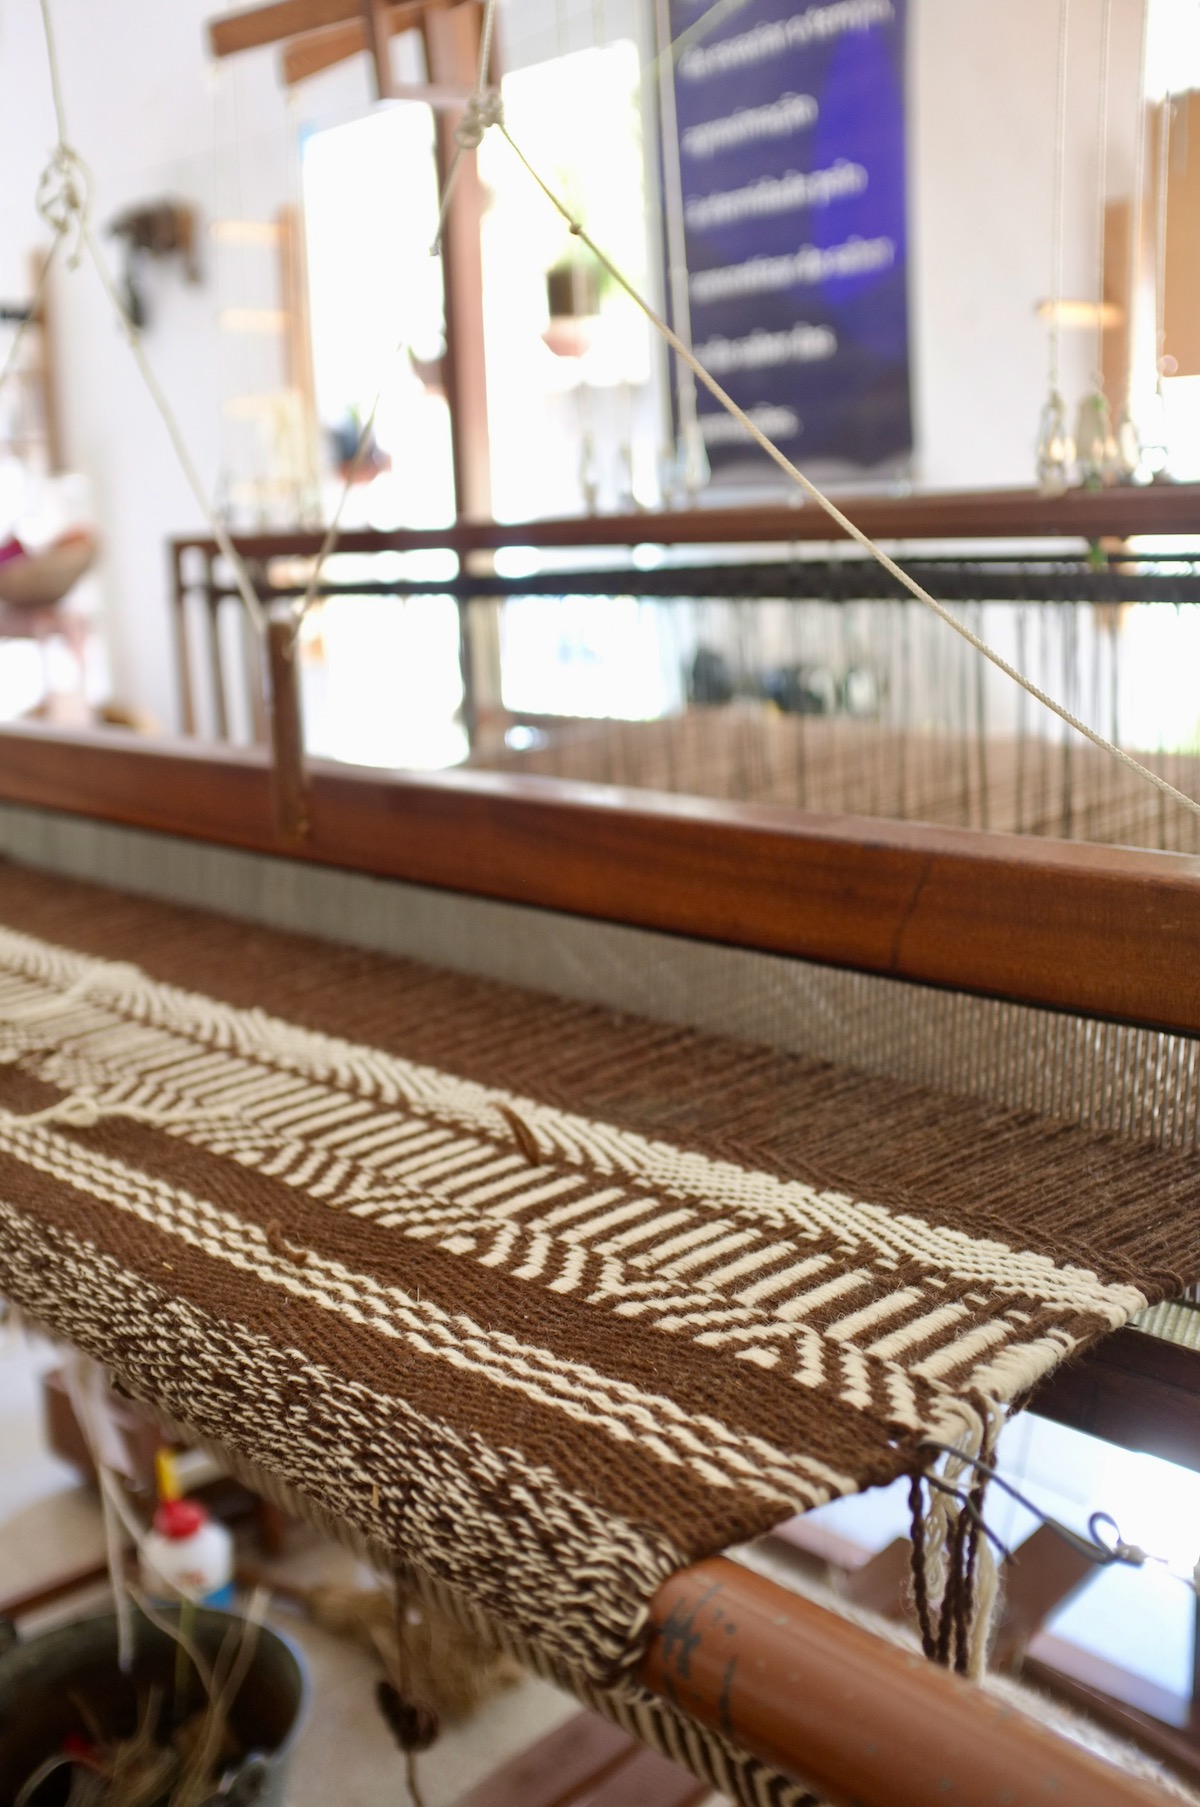 A wooden loom with a brown and cream patterned weaving on it.